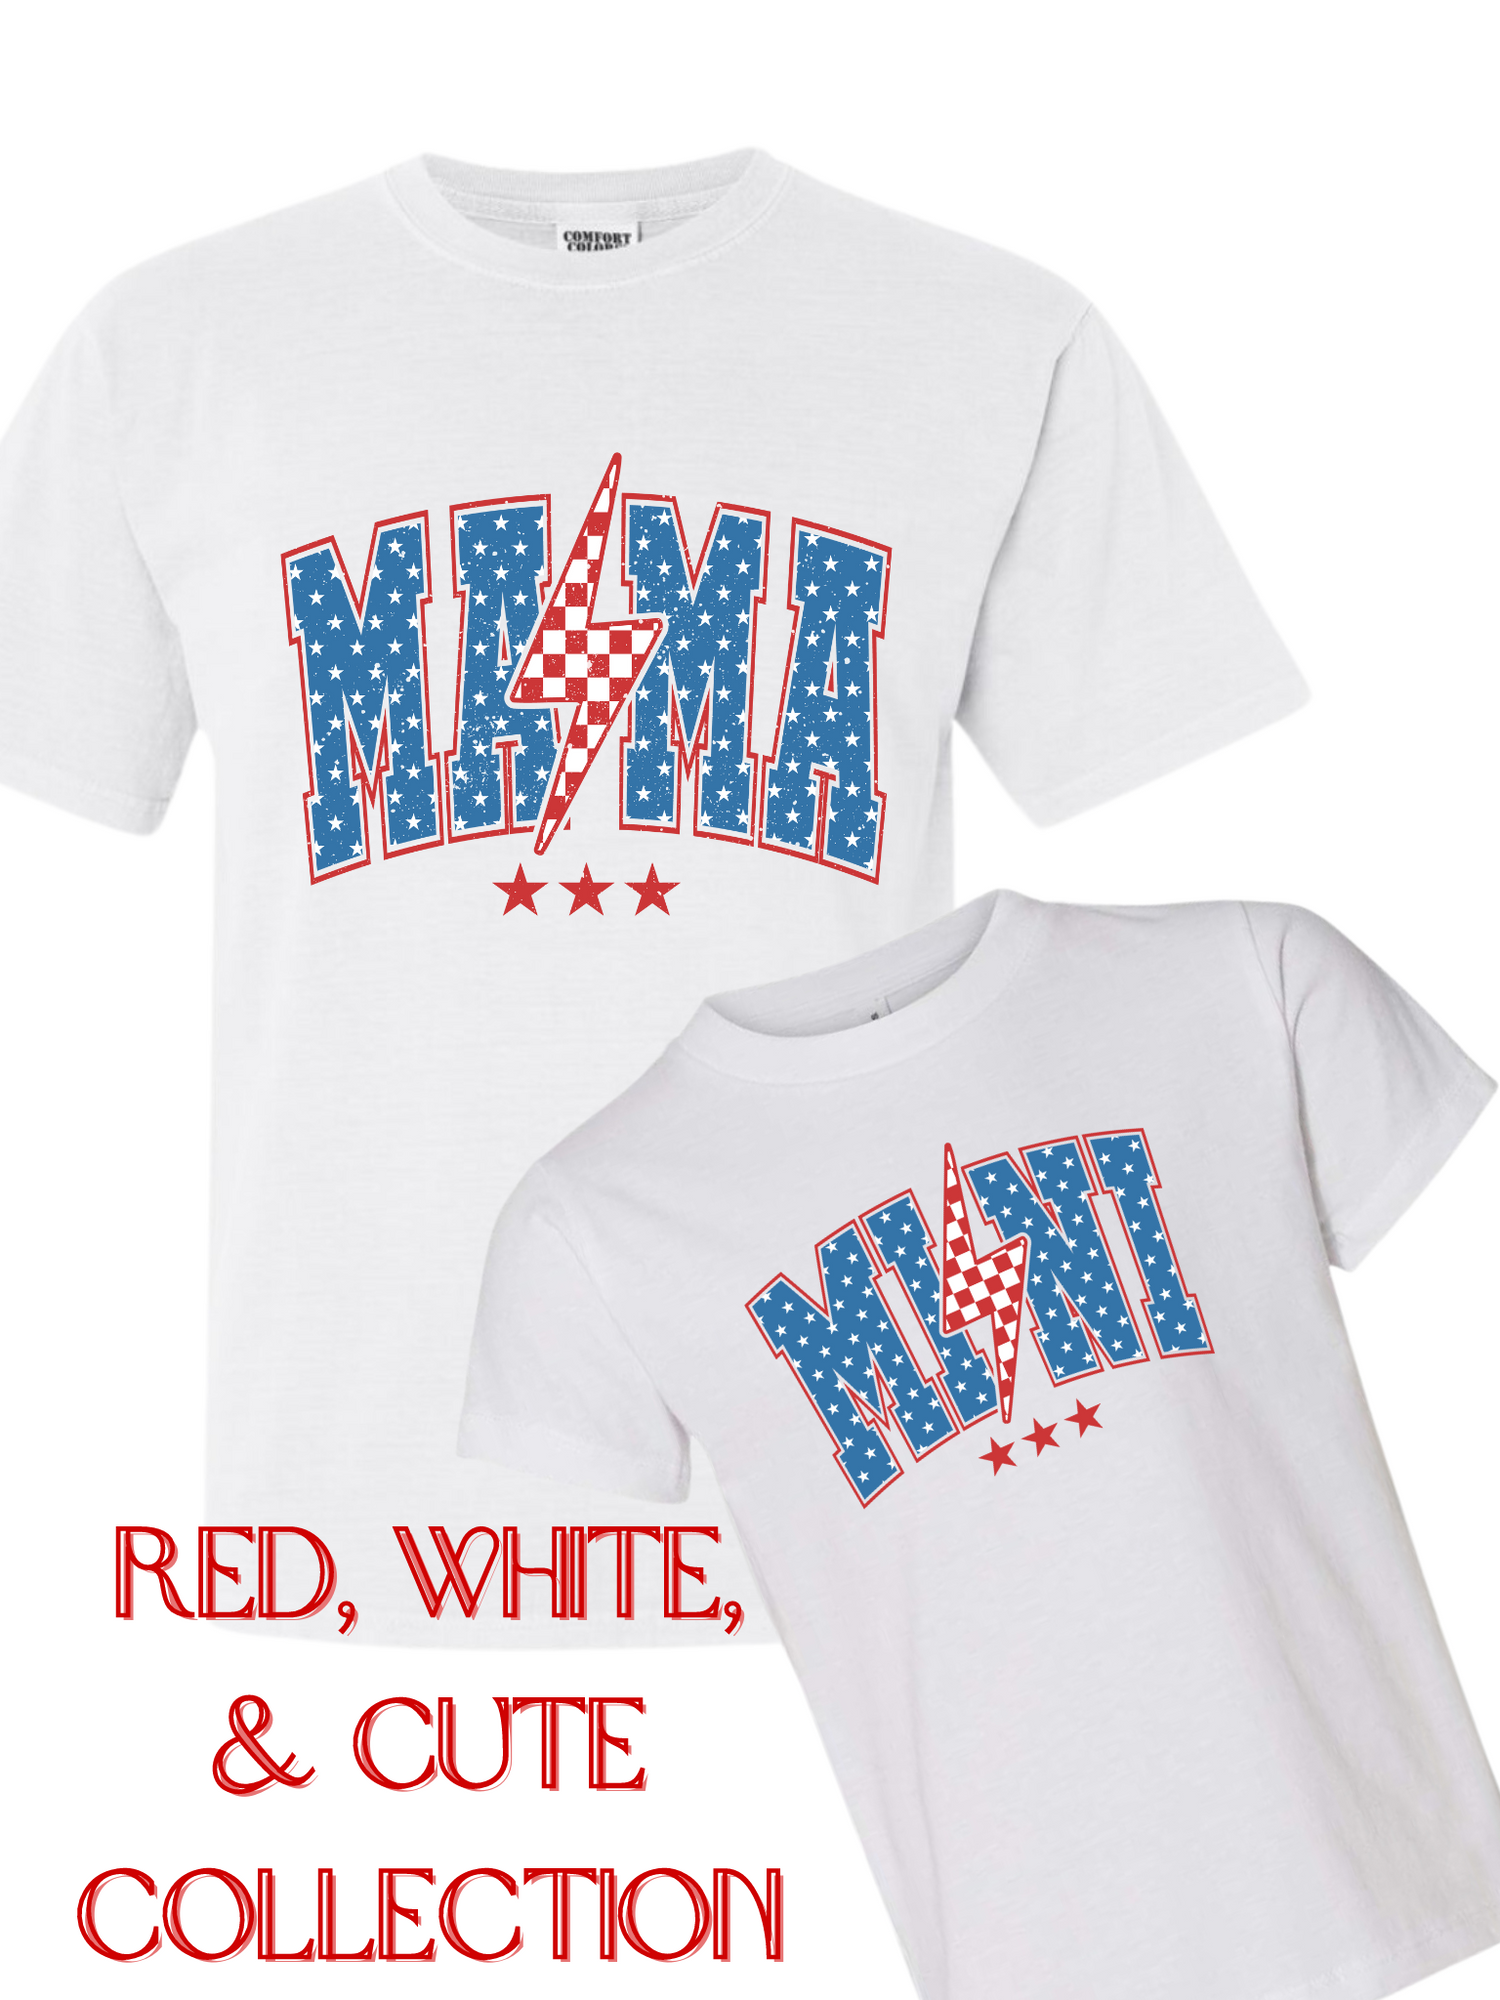 Red, White, & Cute Collection